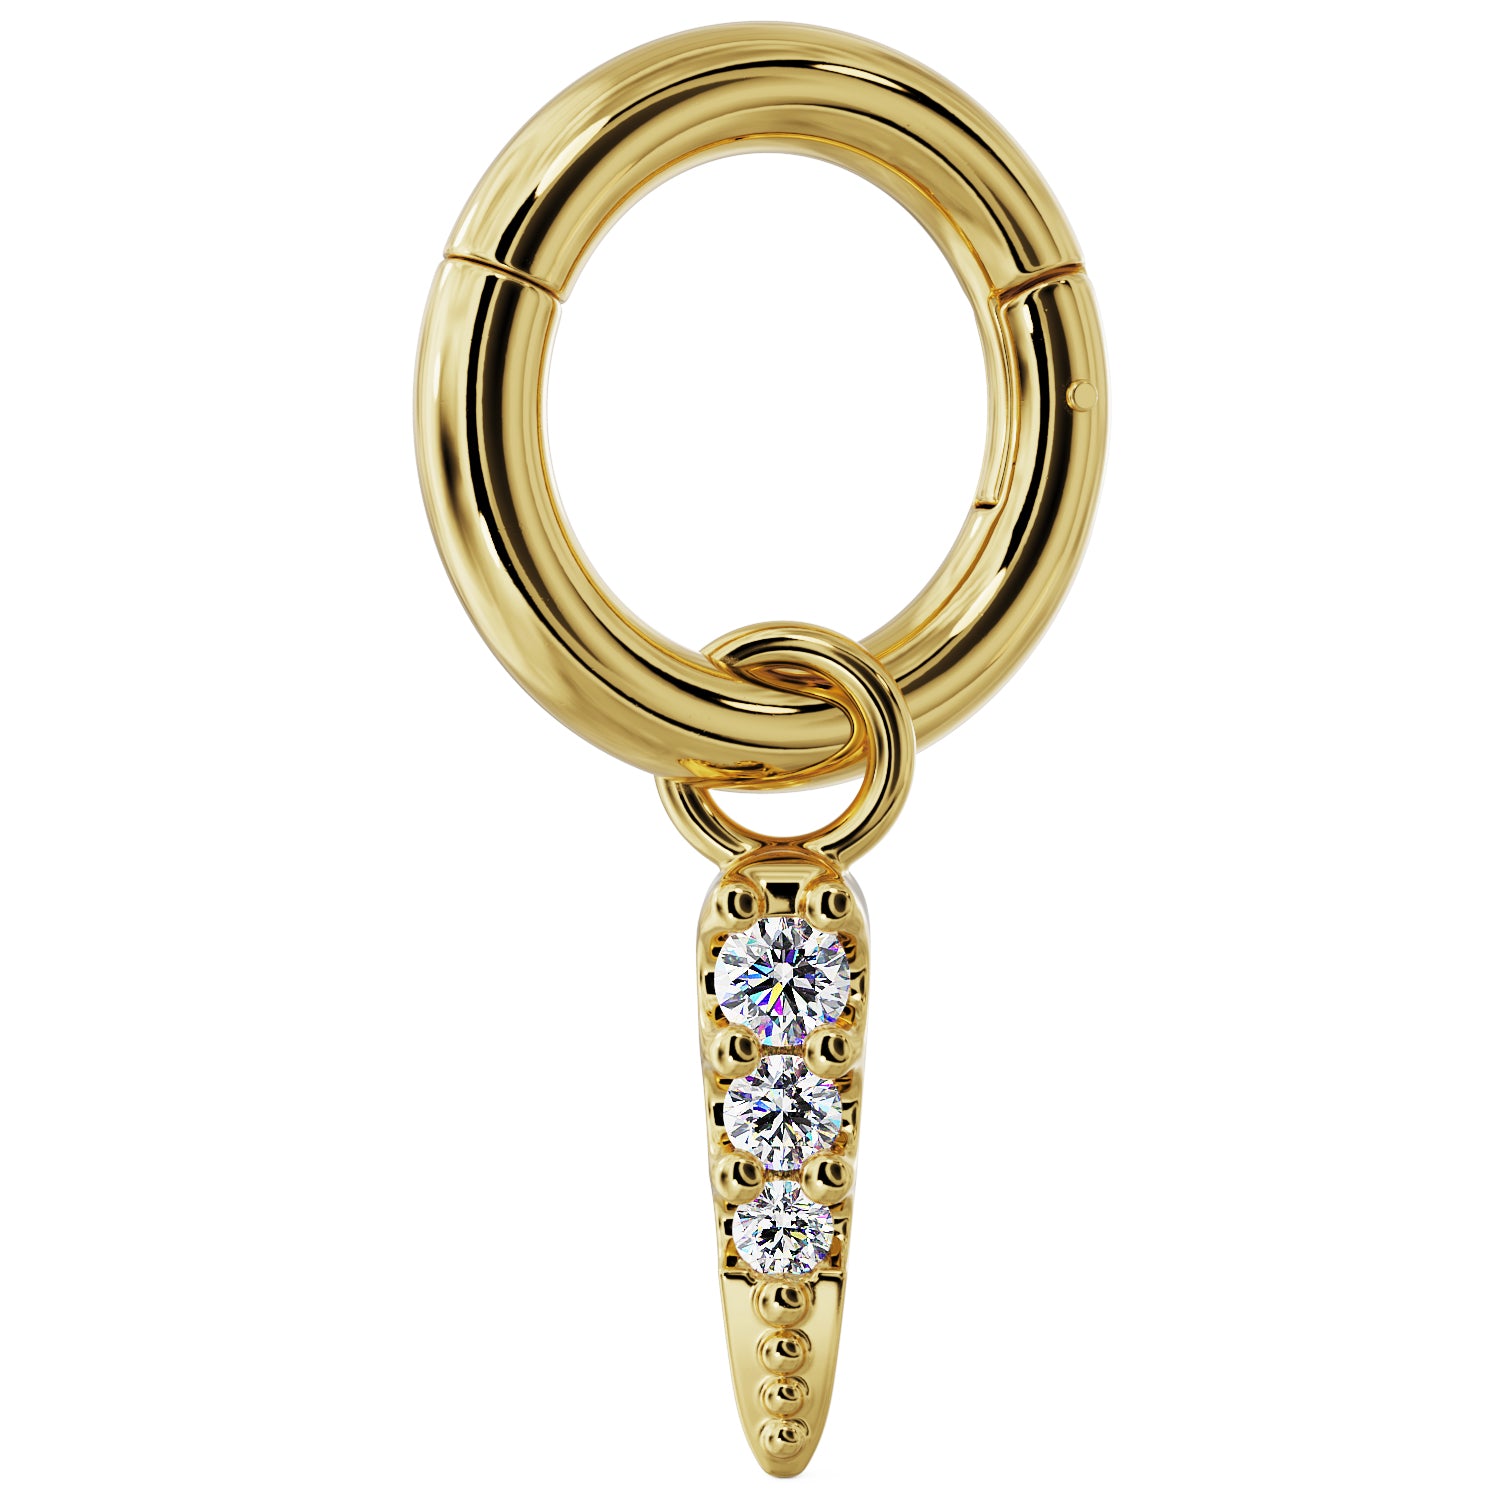 Clicker Ring & Gold - Diamond Spike Charm Accessory for Piercing Jewelry